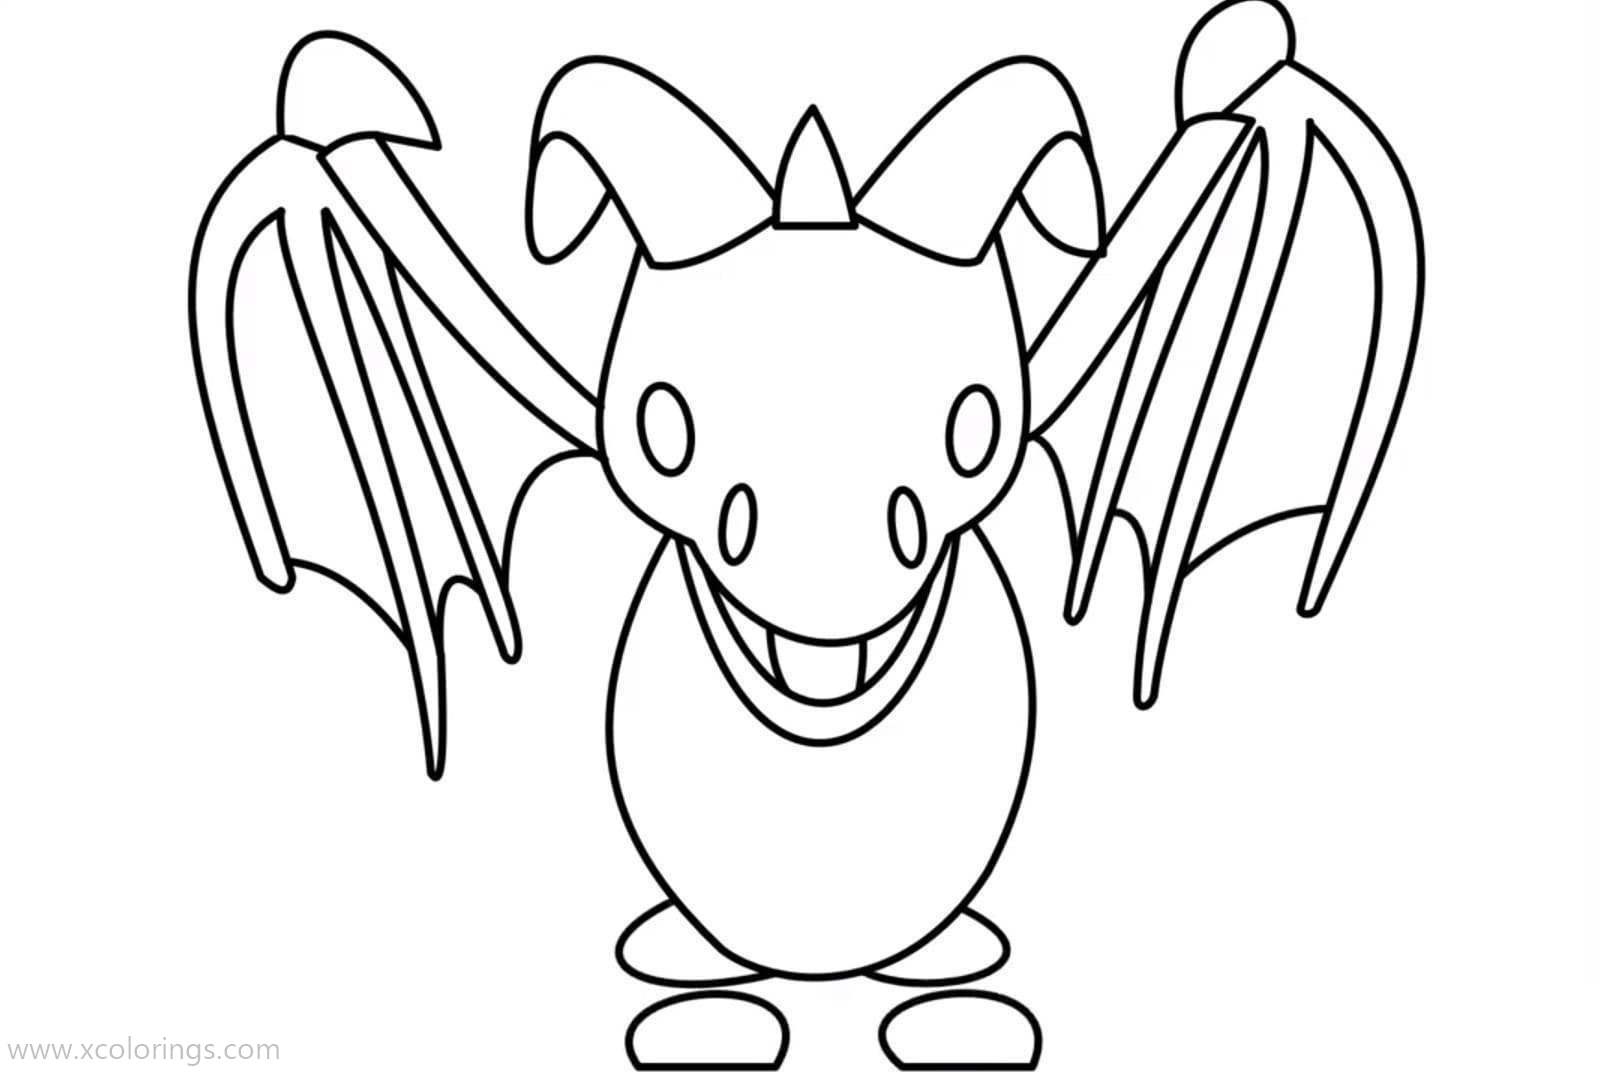 AdoptMe Roblox Coloring Sheets (Page 1) - Line.17QQ.com